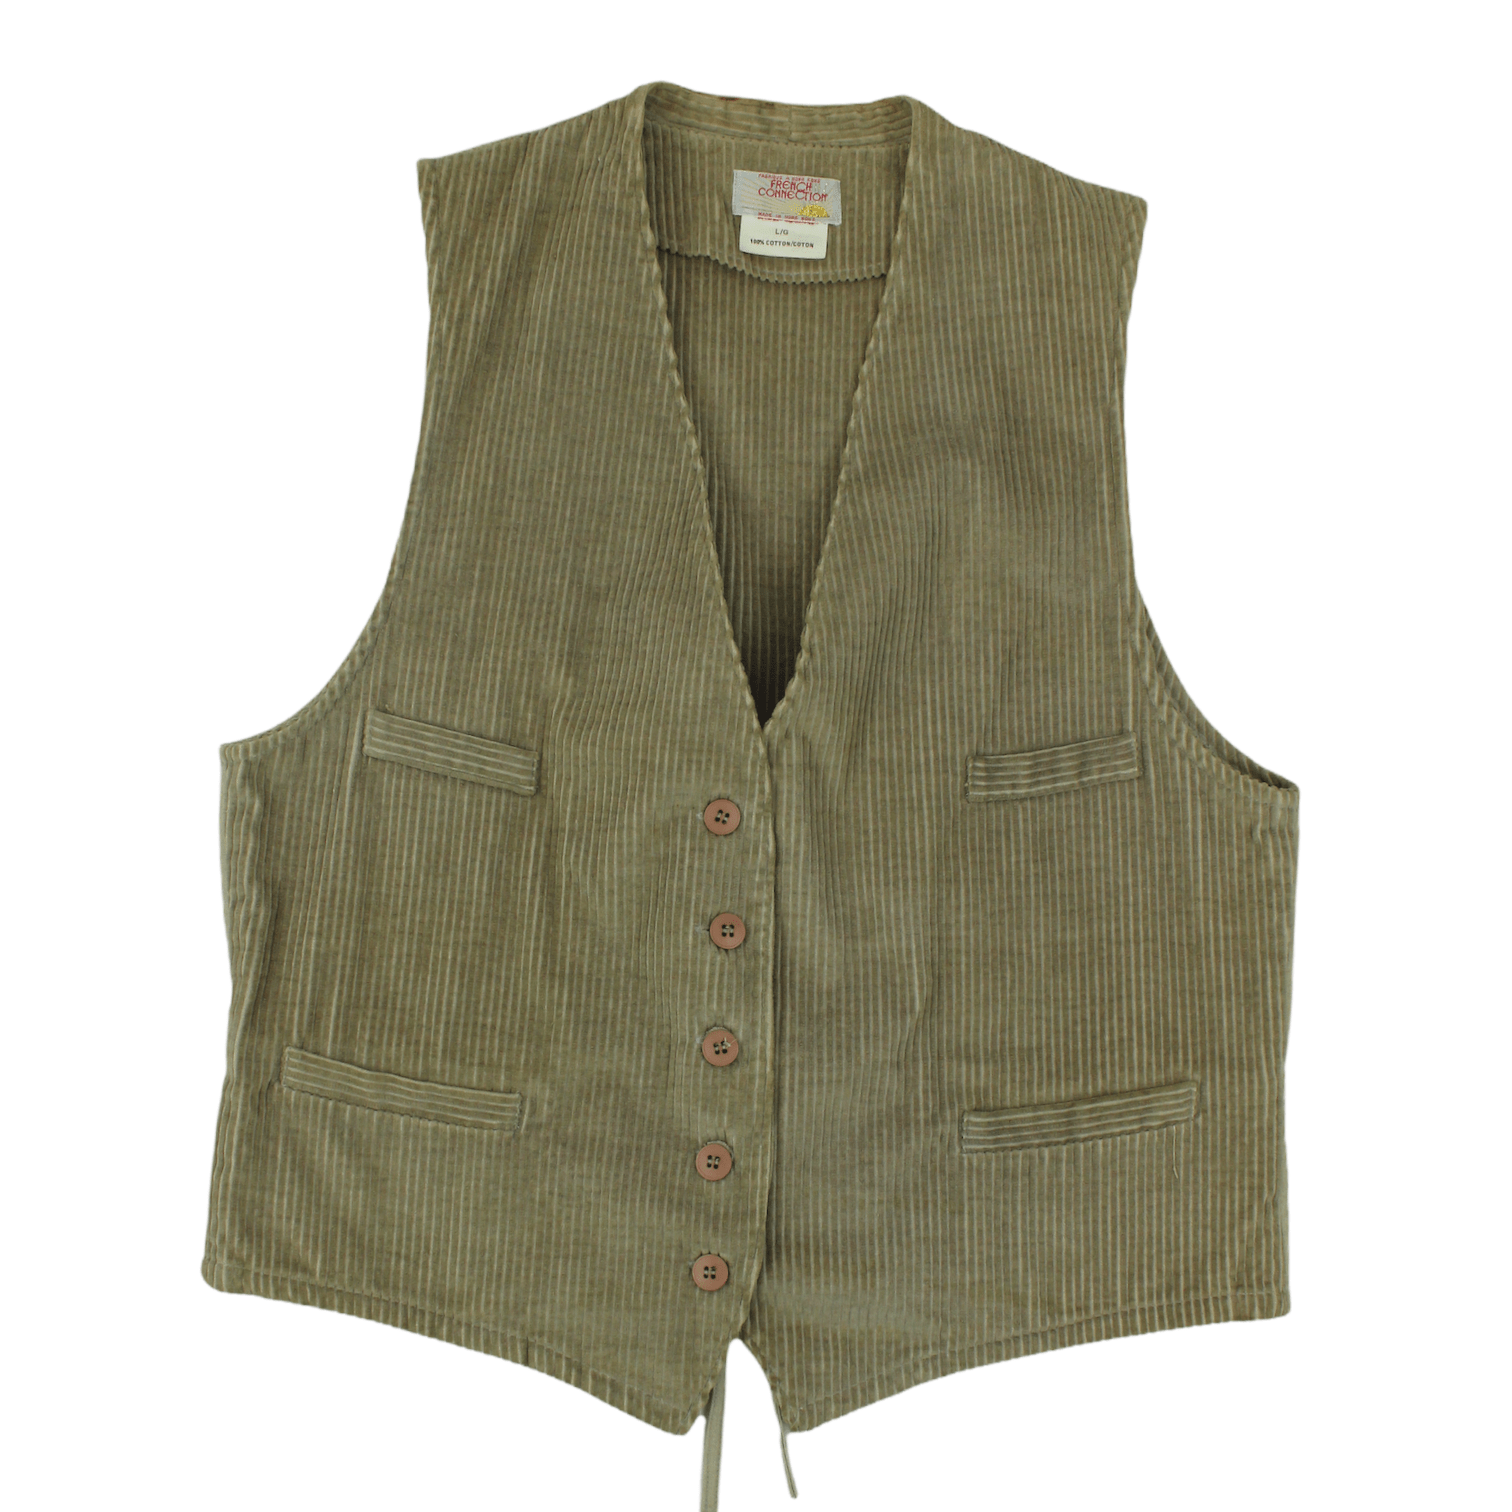 Vintage French Connection Brown Corduroy Waistcoat